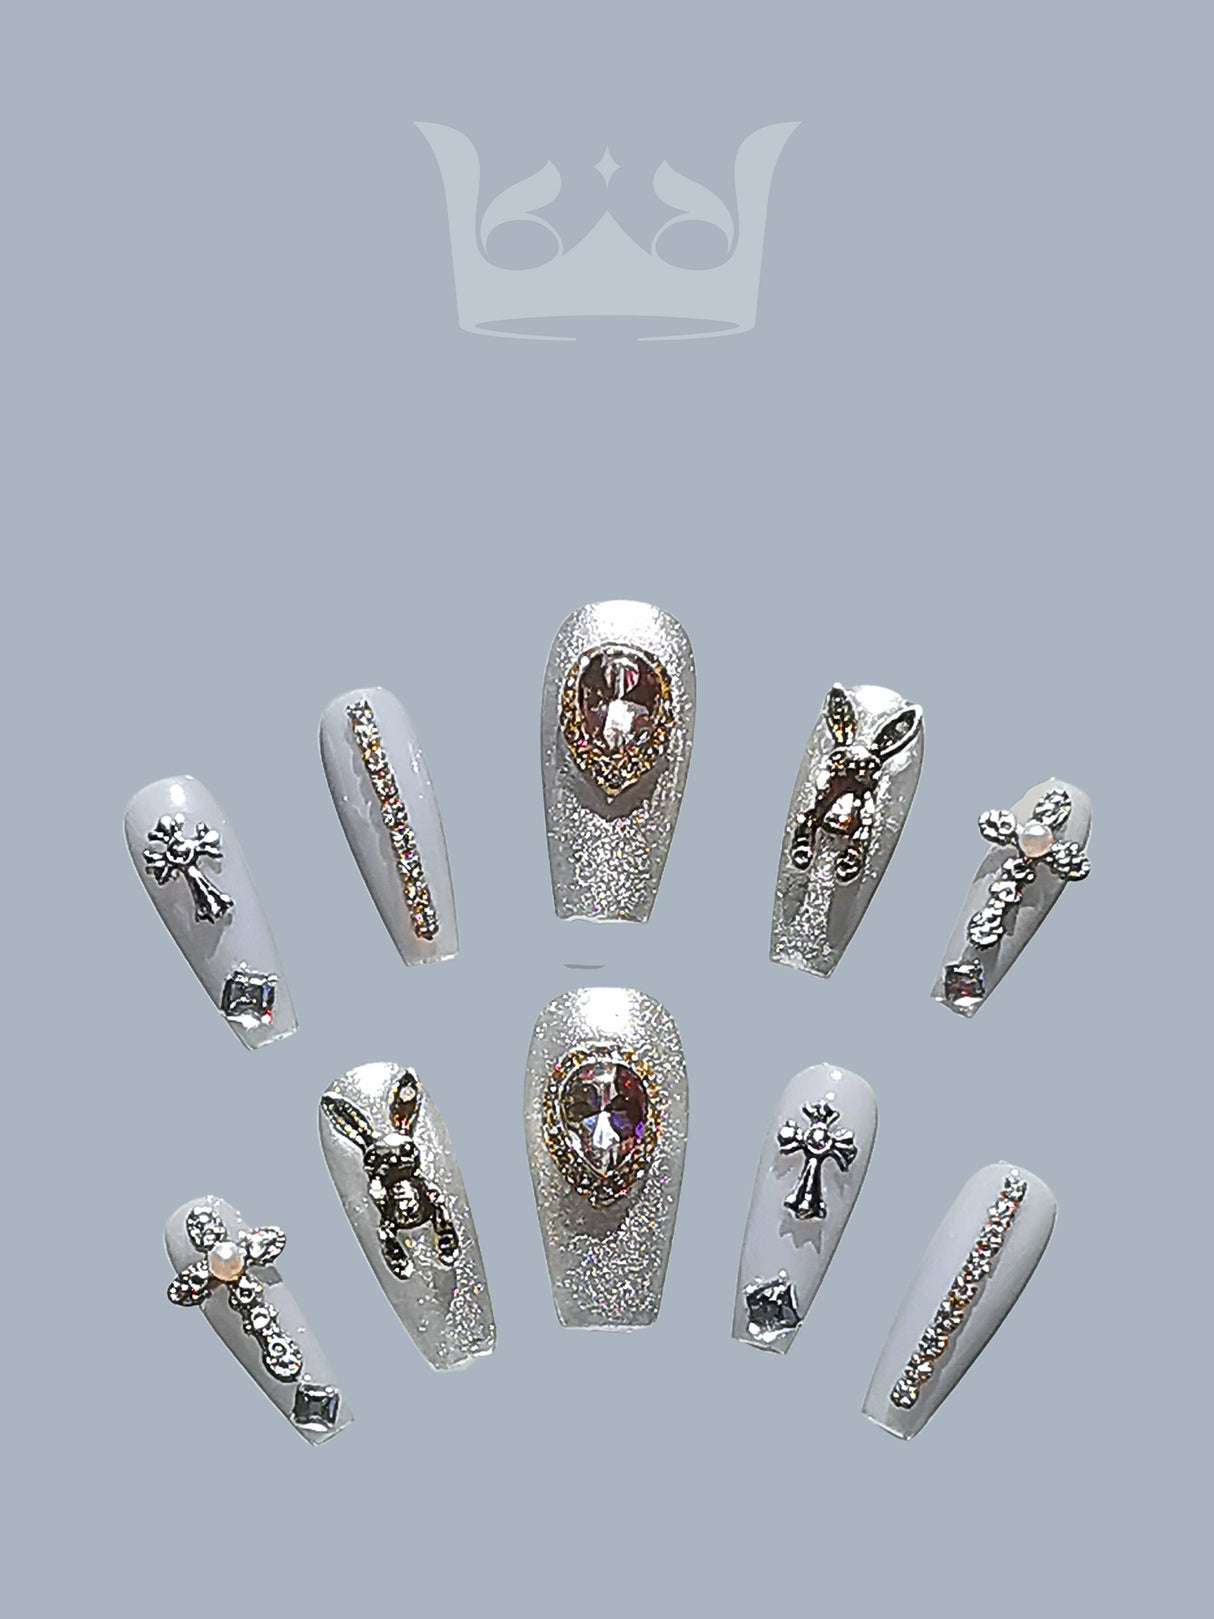 These press-on nails are statement pieces for special occasions, featuring rhinestones, gems, metallic accents, 3D embellishments, glitter, and artistic details.